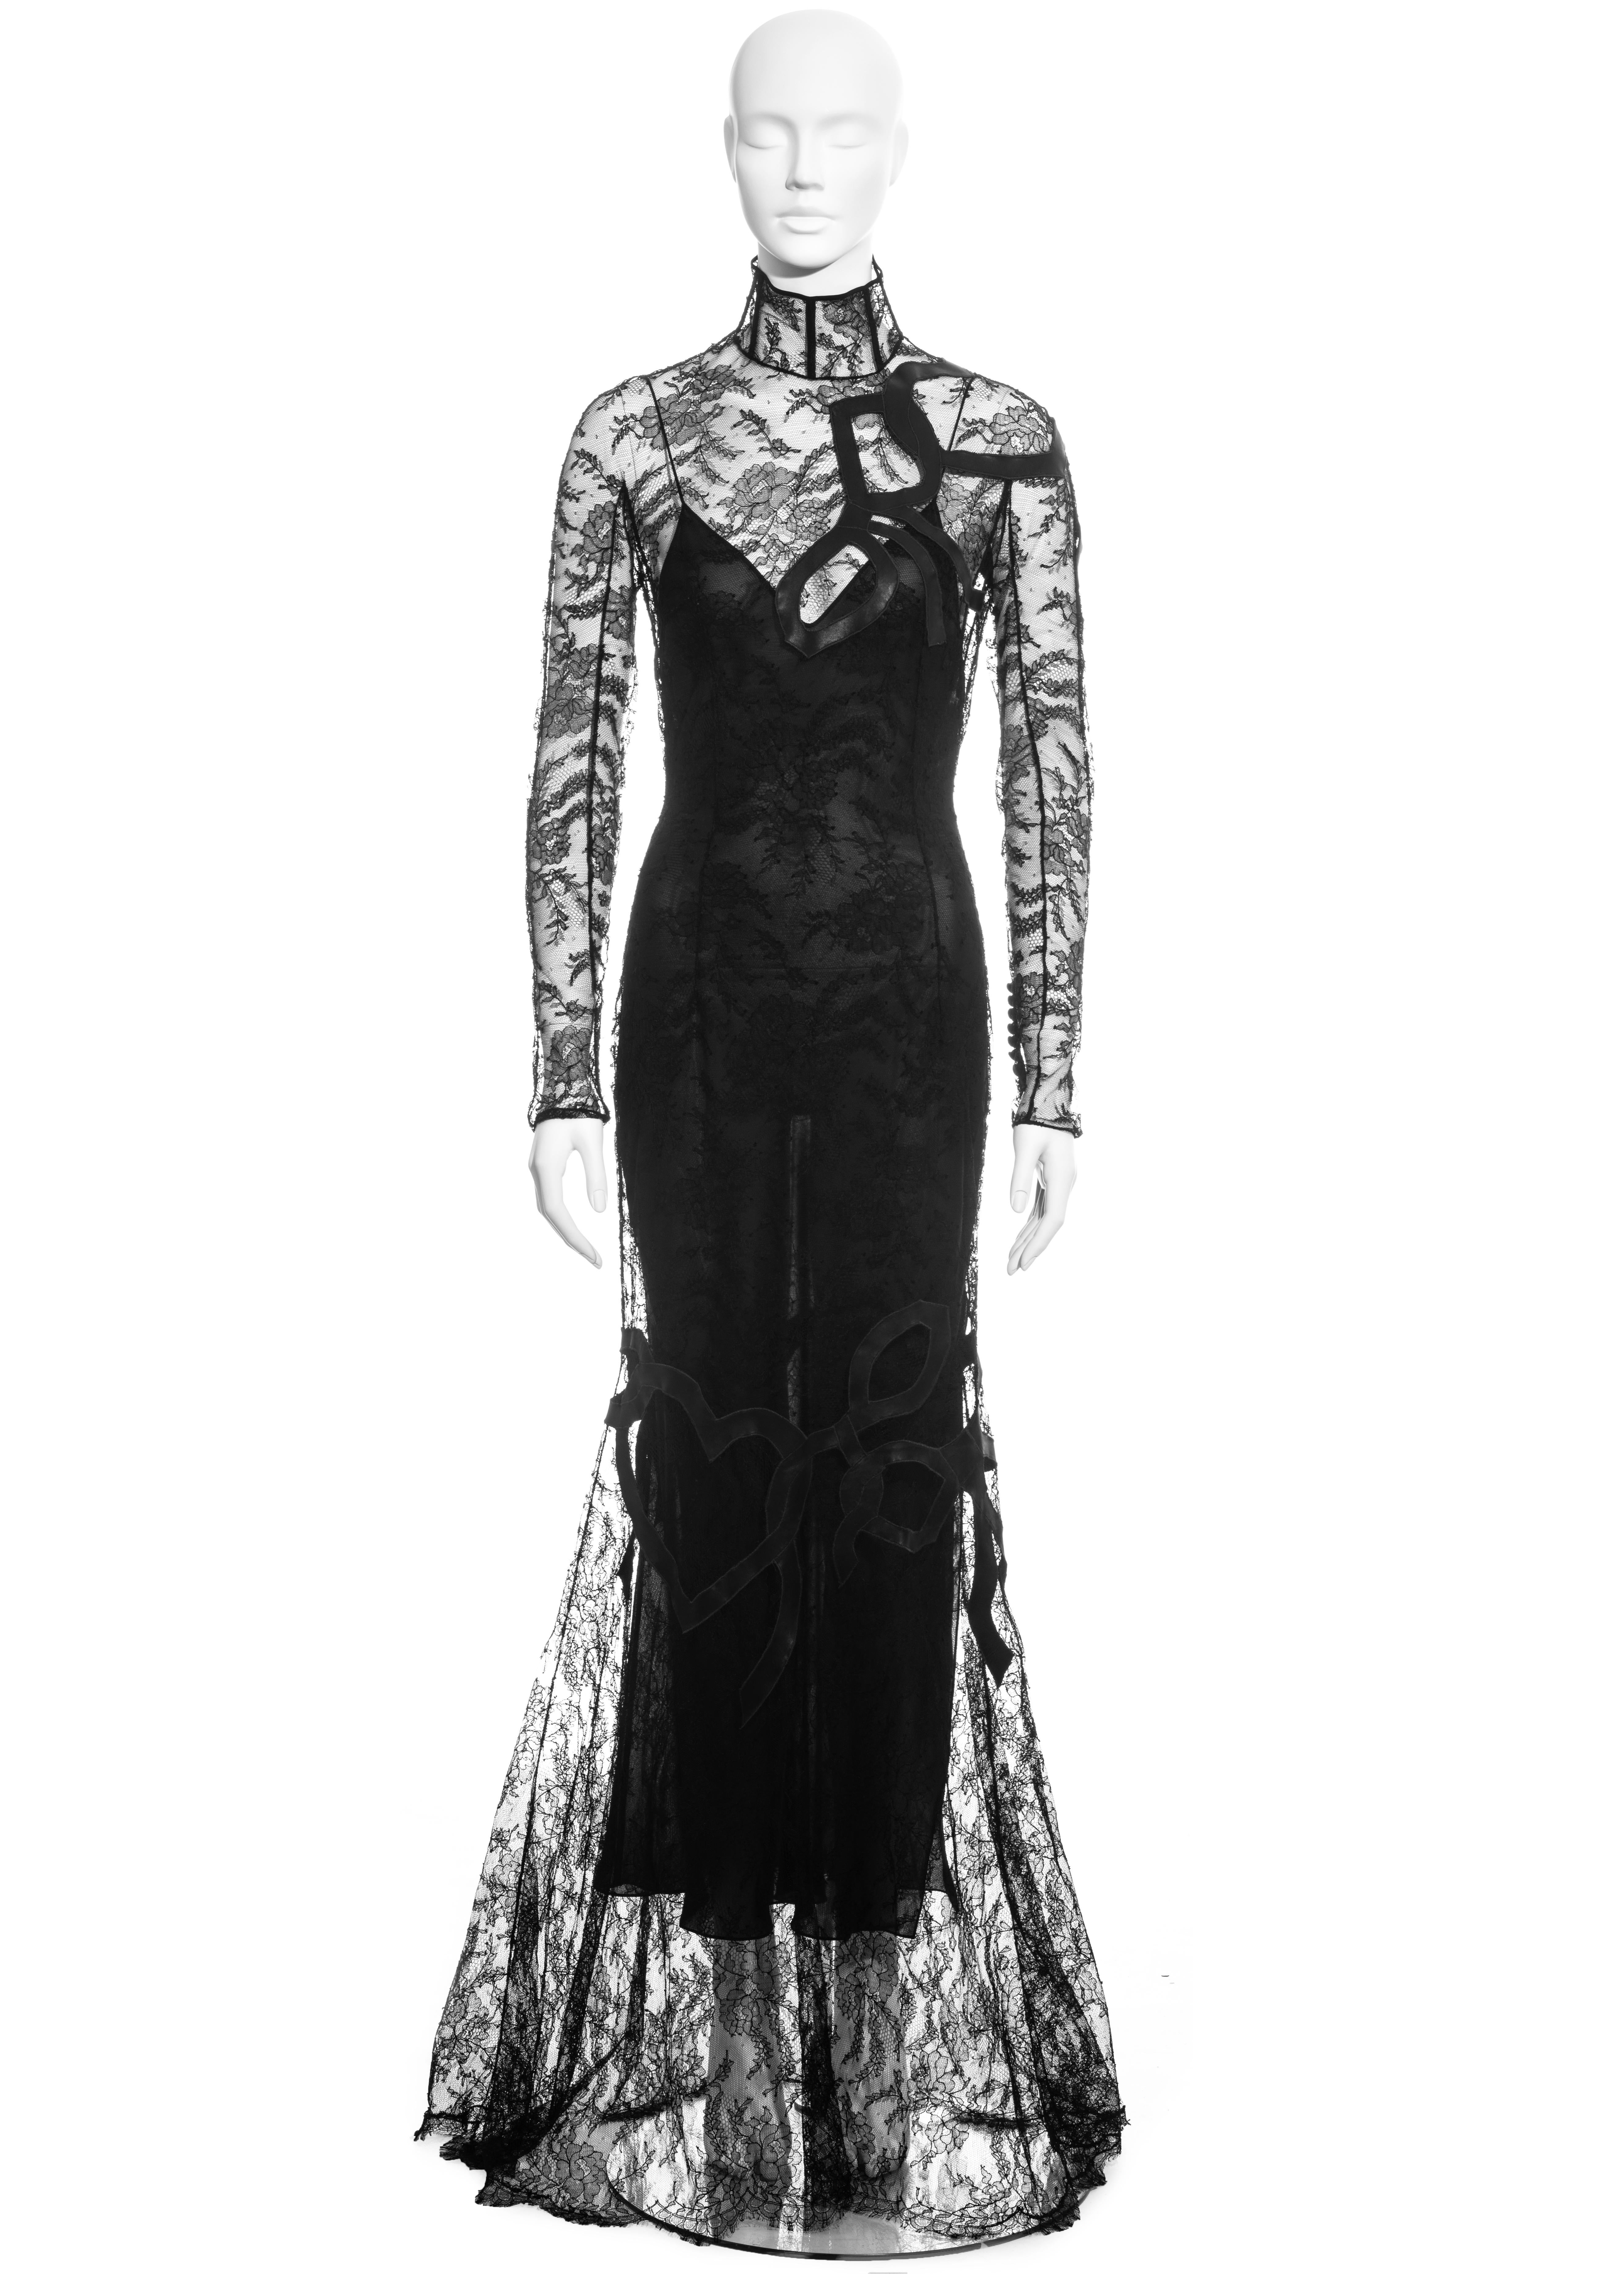 ▪ Black lace trained long-sleeve evening dress
▪ High-neck
▪ Ribbon shaped leather appliqués 
▪ Multiple fabric covered button fastenings 
▪ Detached black silk spaghetti strap slip dress
▪ FR 42 - UK 14 - US 8 
▪ Fall-Winter 2001